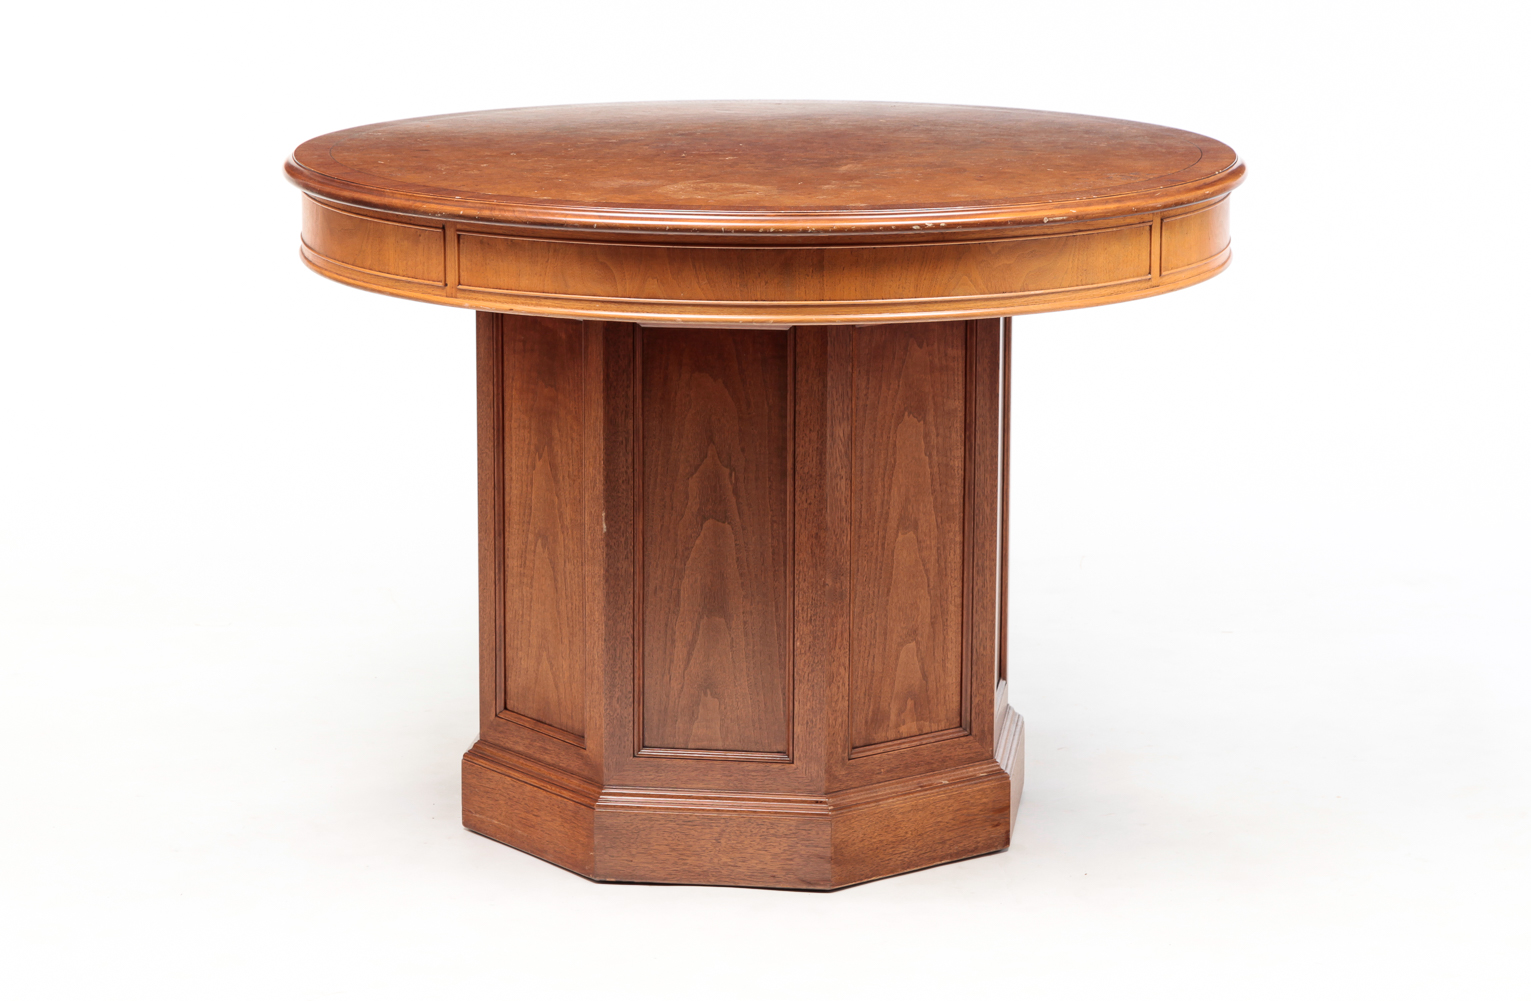 AMERICAN ROUND CENTER TABLE. Late 20th